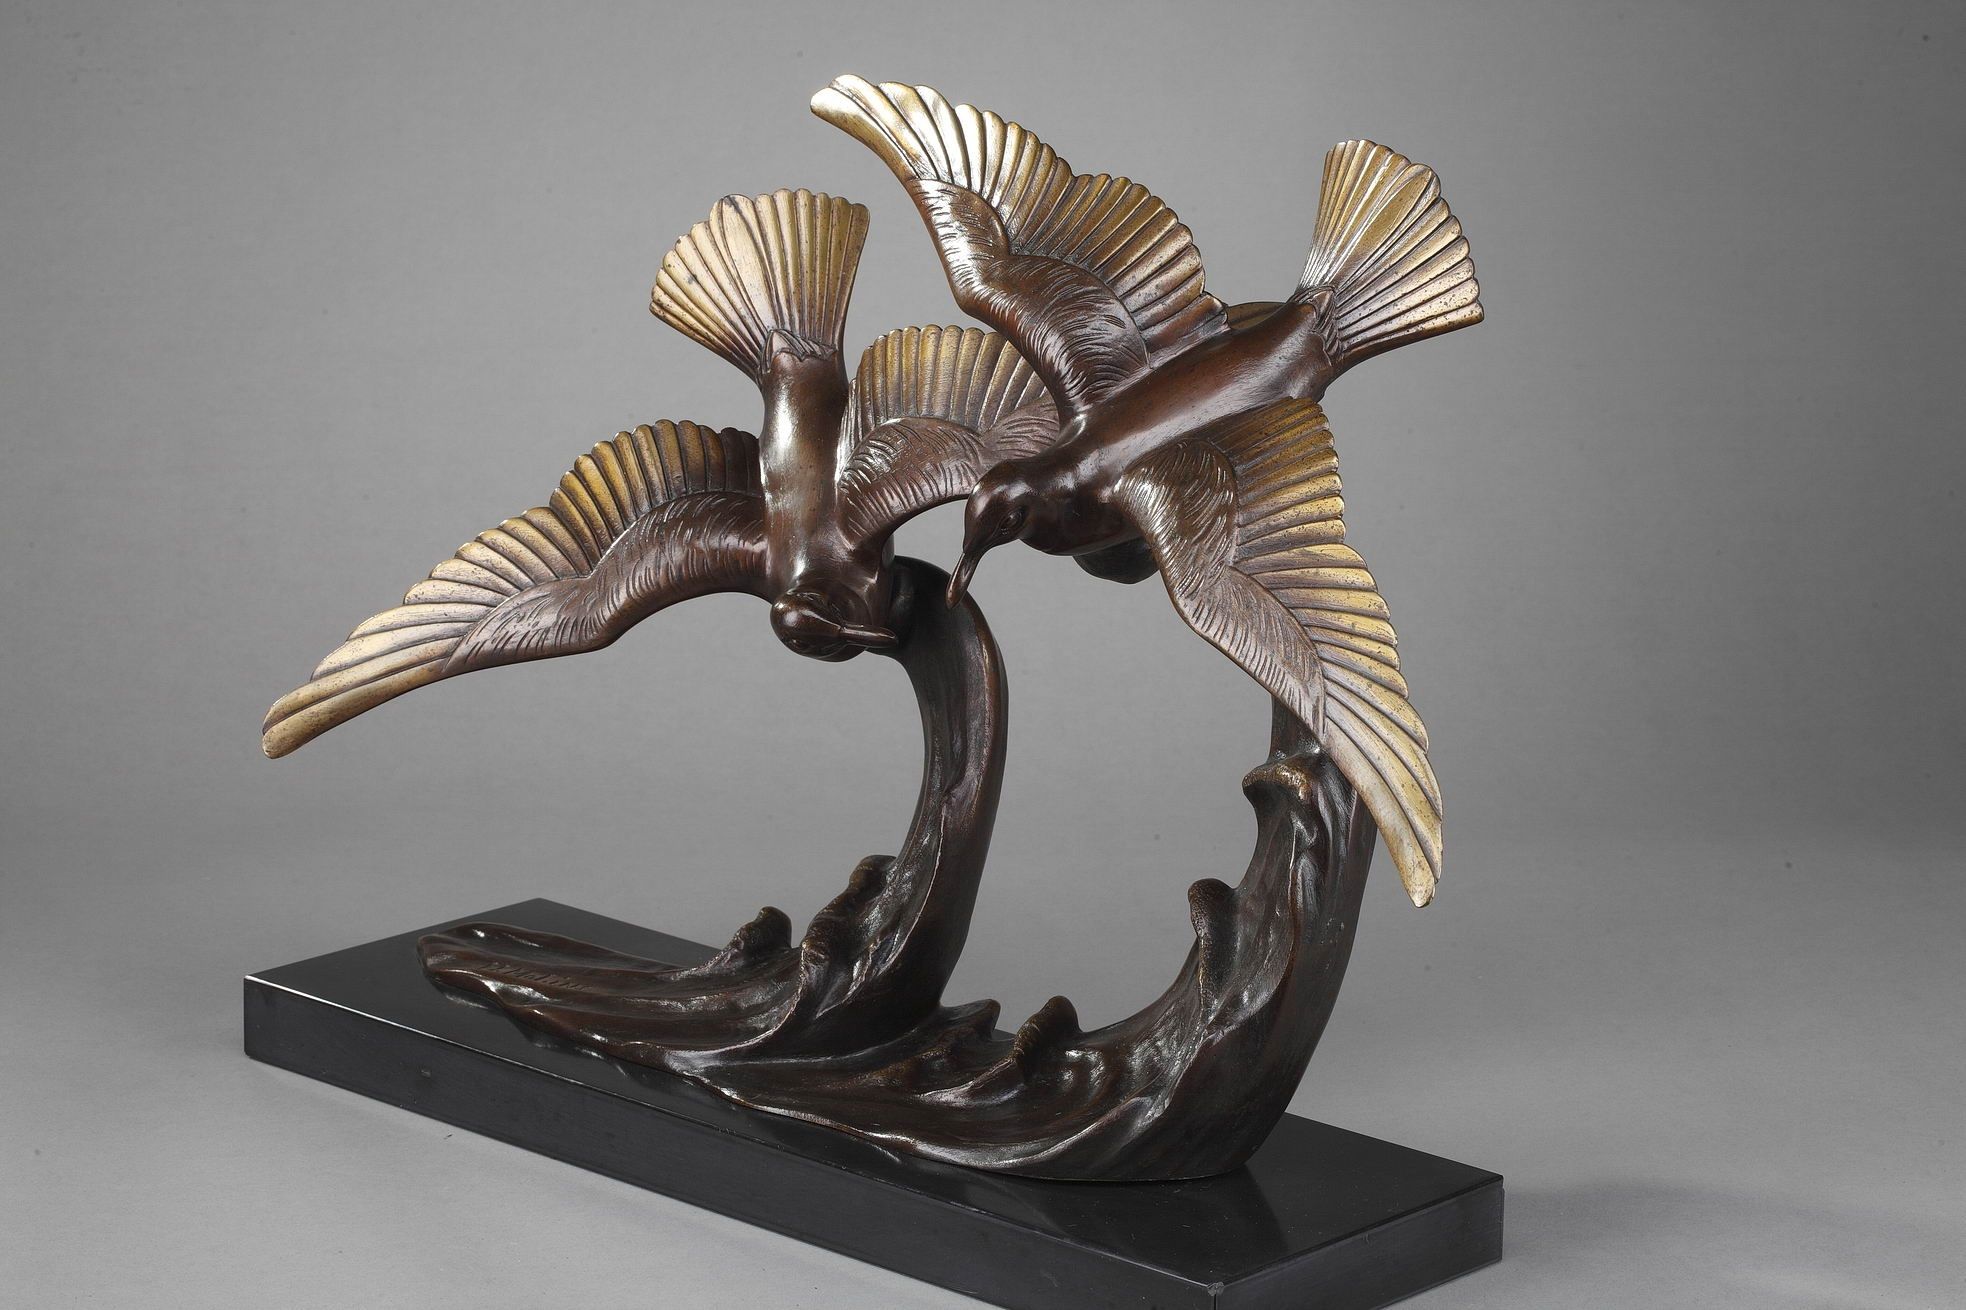 BRONZE "TWO SEAGULLS ON A WAVE" BY ENRIQUE MOLINS 